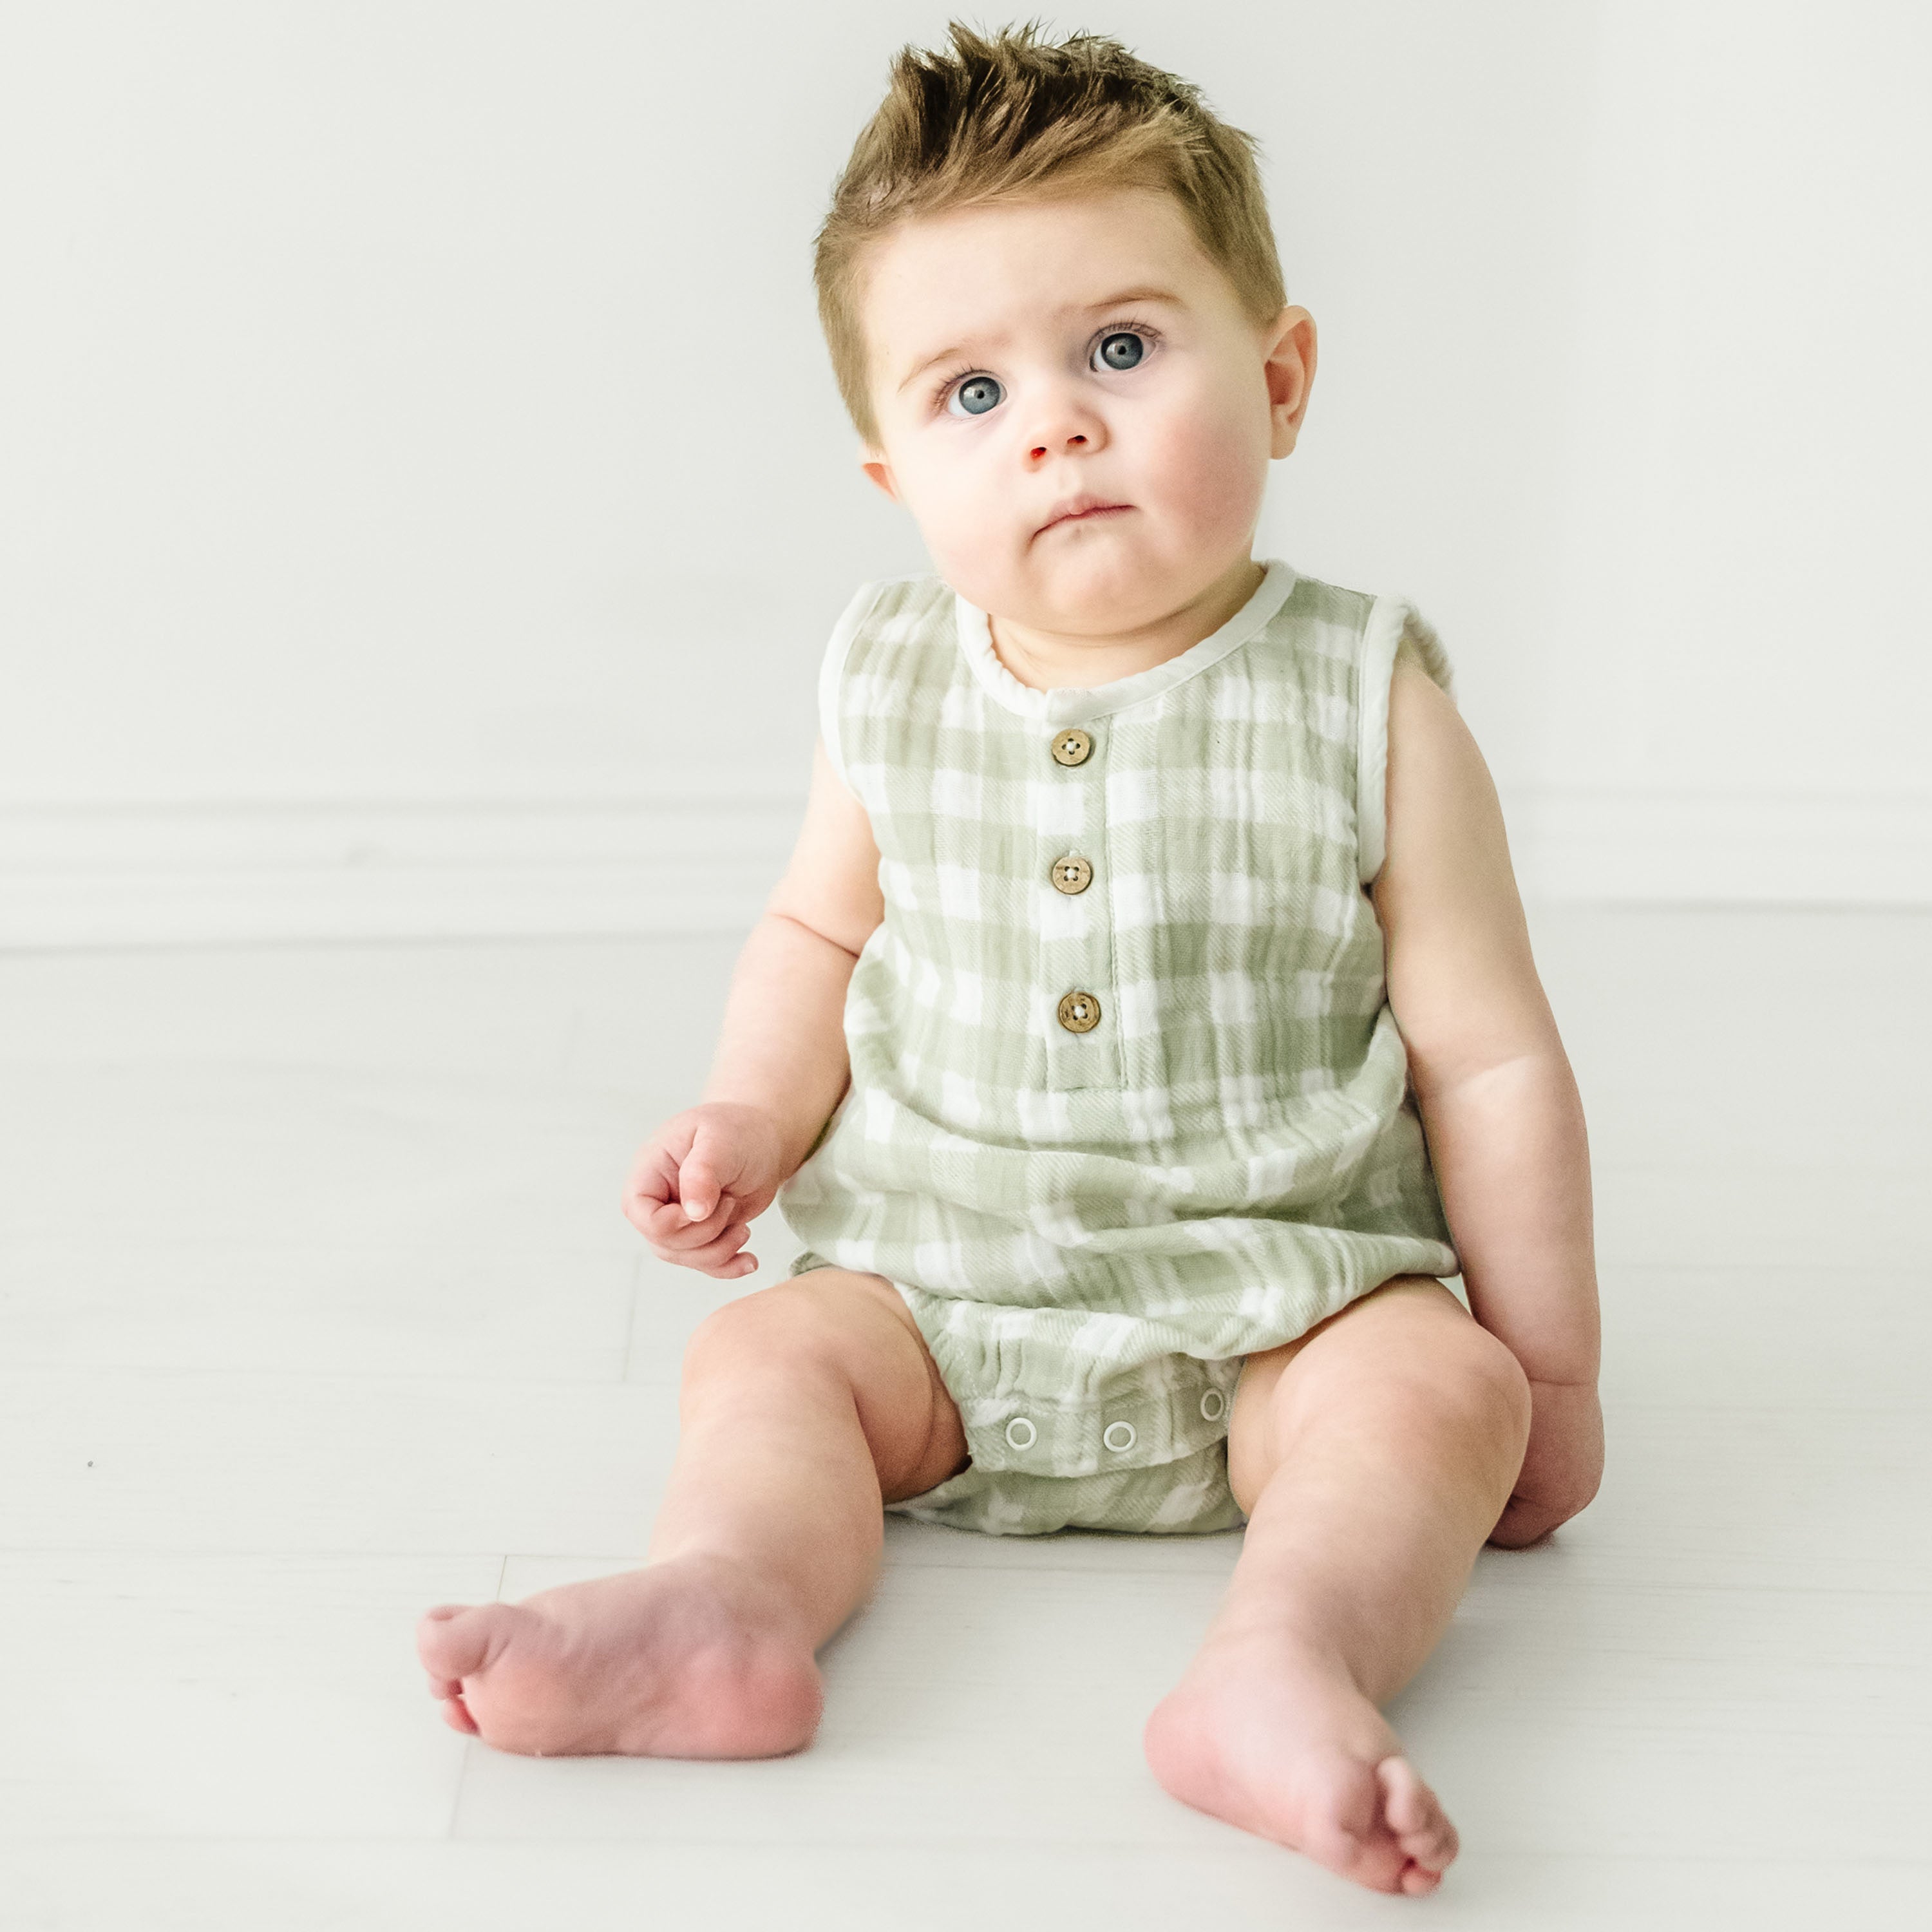 A toddler with wide eyes and tousled hair sits on a white floor, wearing a Makemake Organics Organic Muslin Bubble Onesie in Gingham with button details.